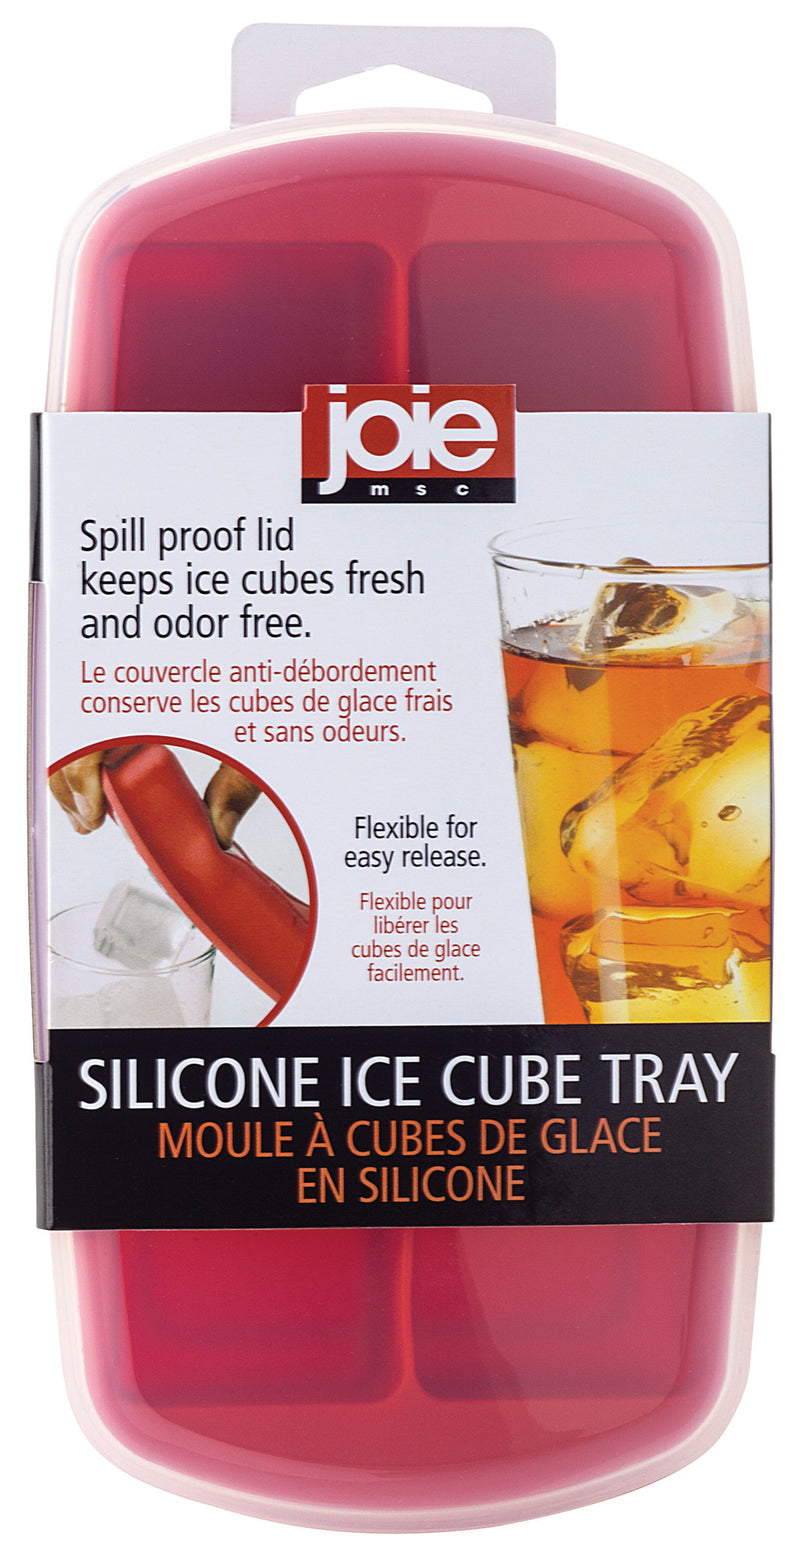 products/29110_SiliconeIceCubeTray_C.jpg